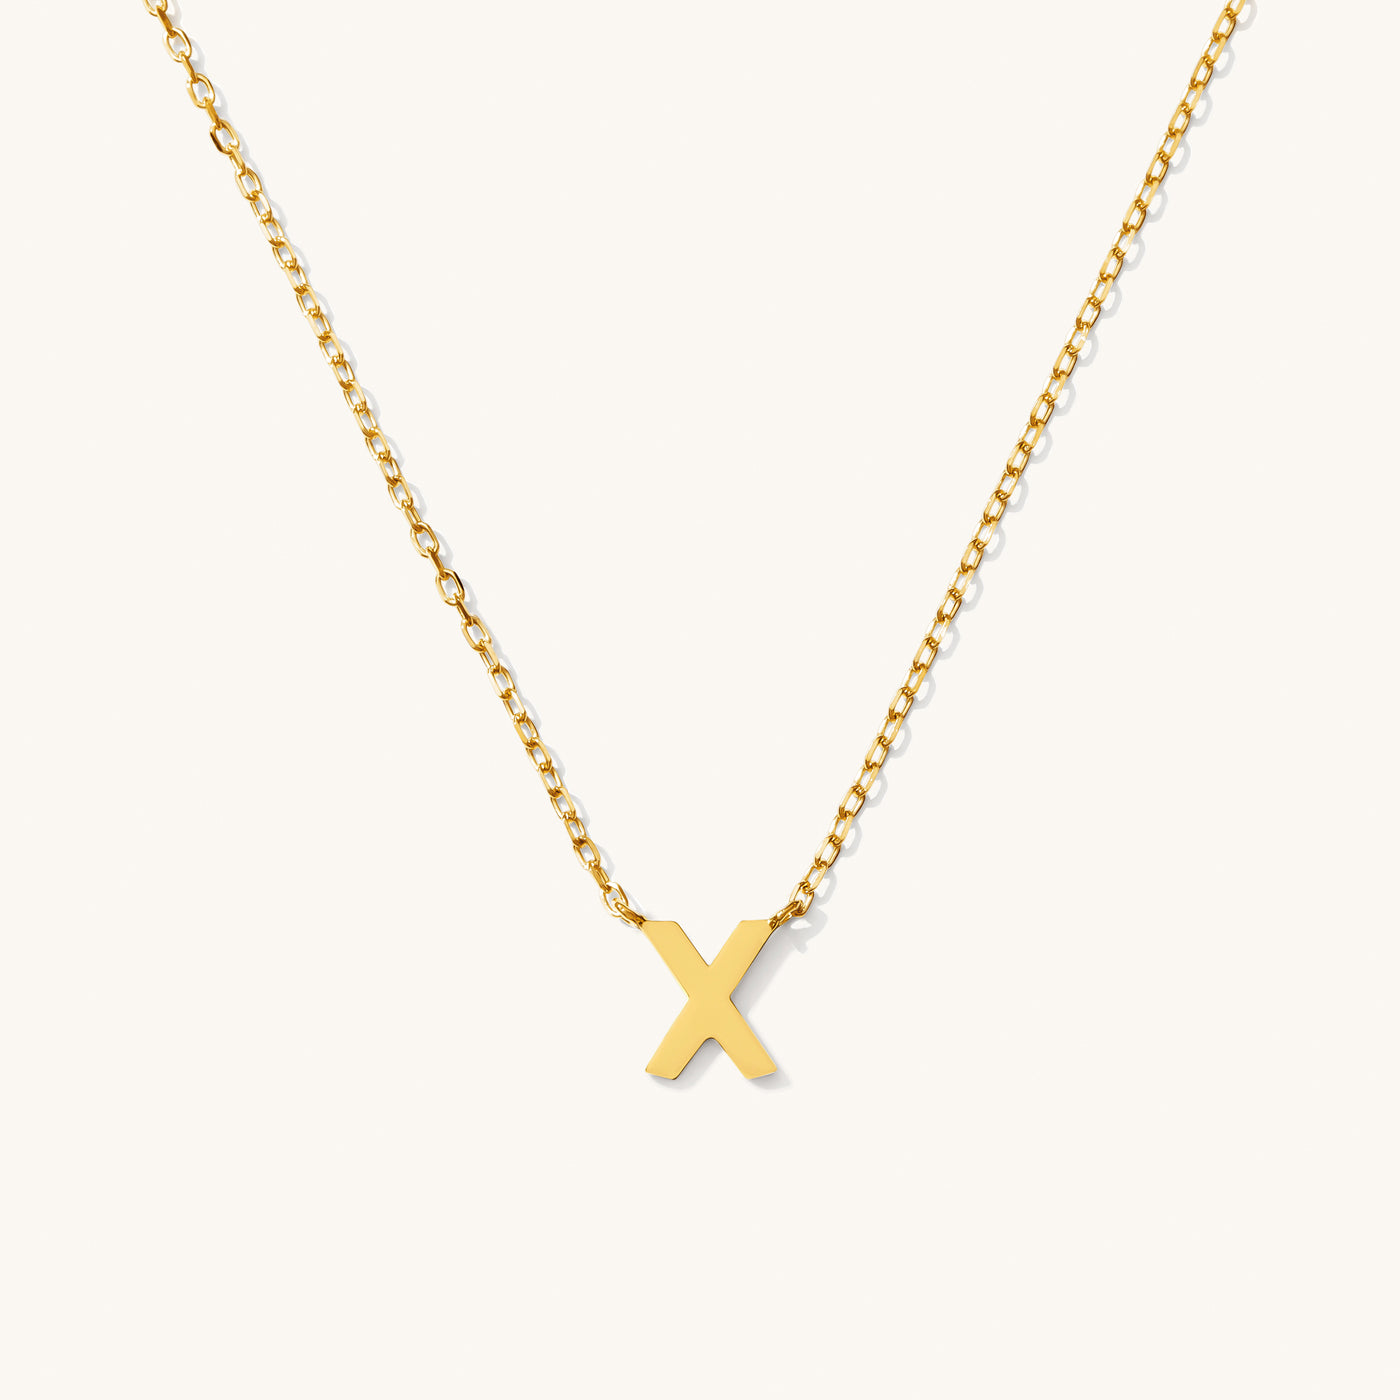 X Tiny Initial Necklace - 14k Solid Gold